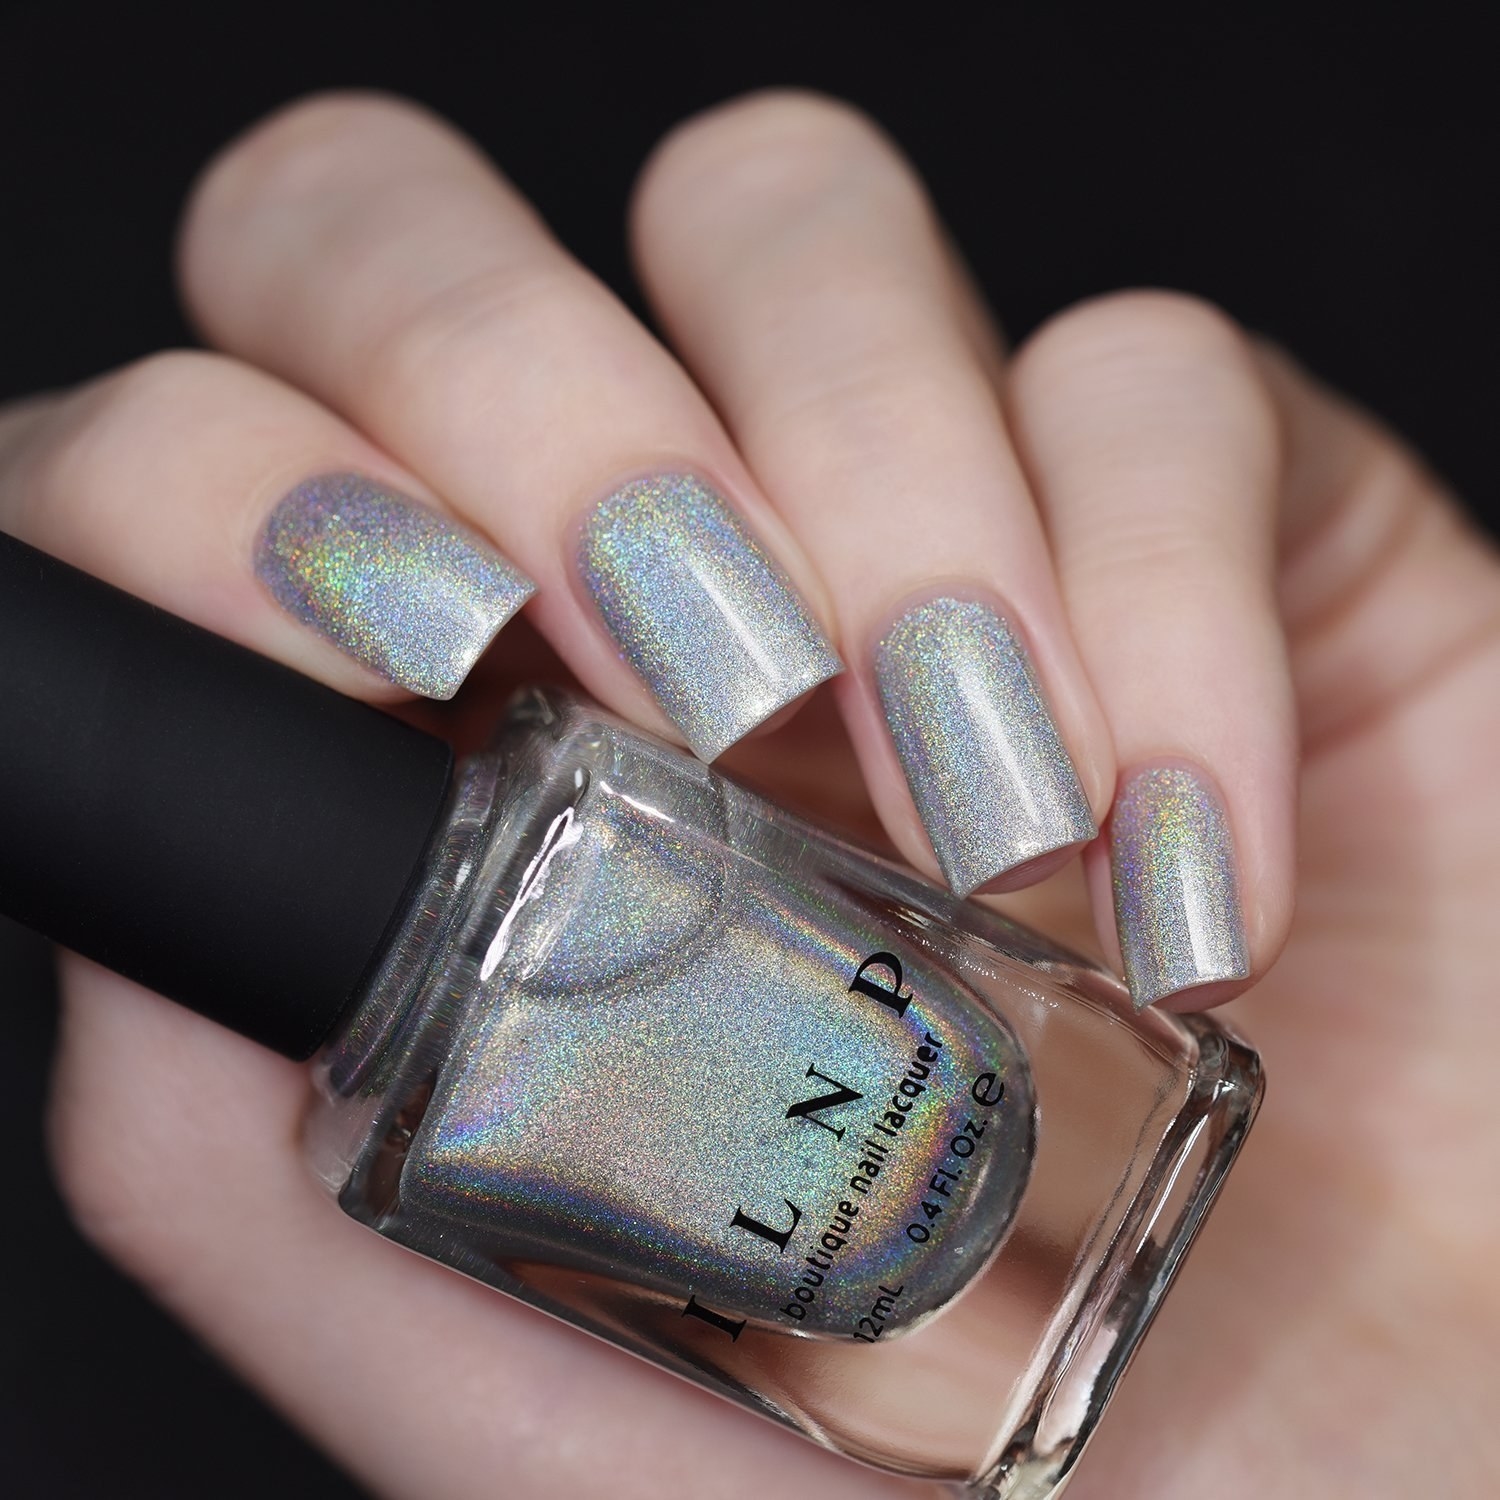 holographic nail polish bottle and nails painted with polish 